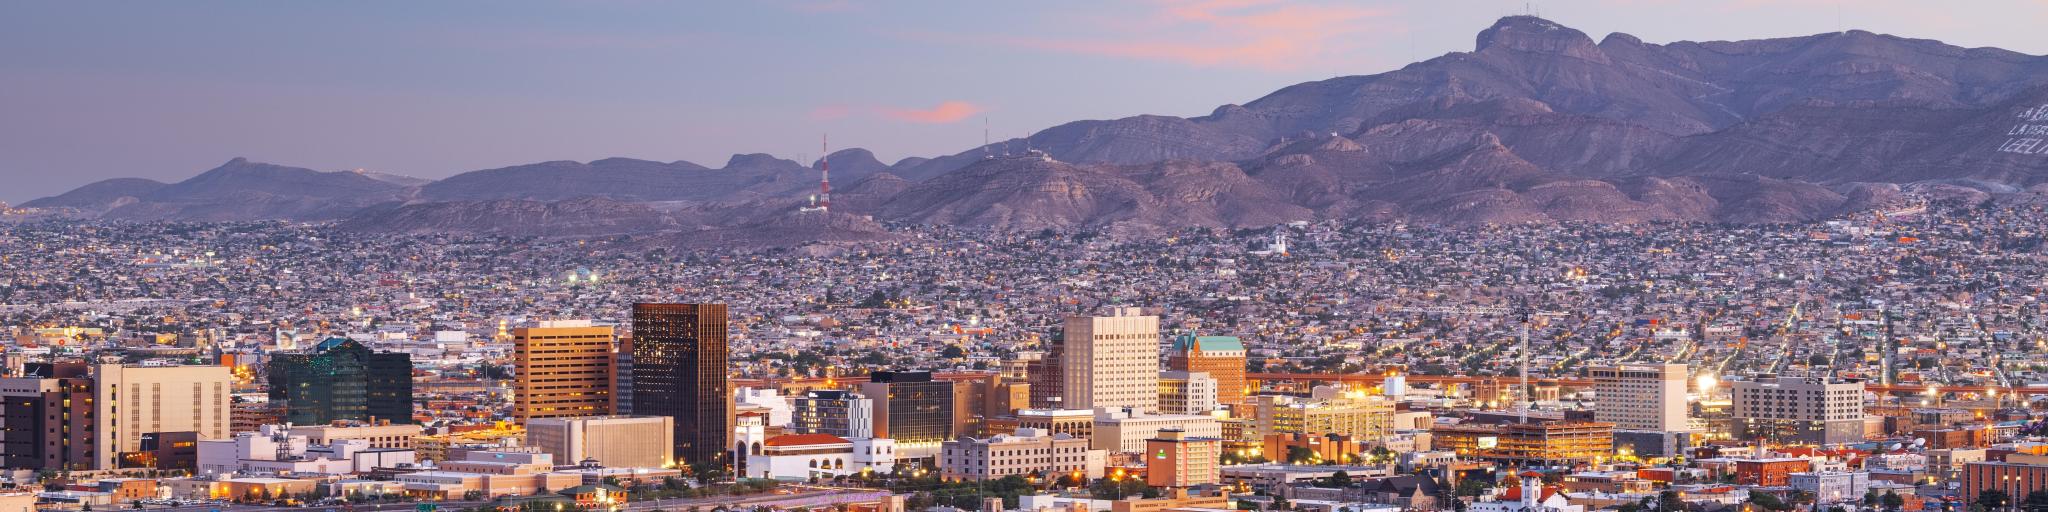 El Paso, Texas, USA with the downtown city skyline at dusk with Juarez, Mexico in the distance.